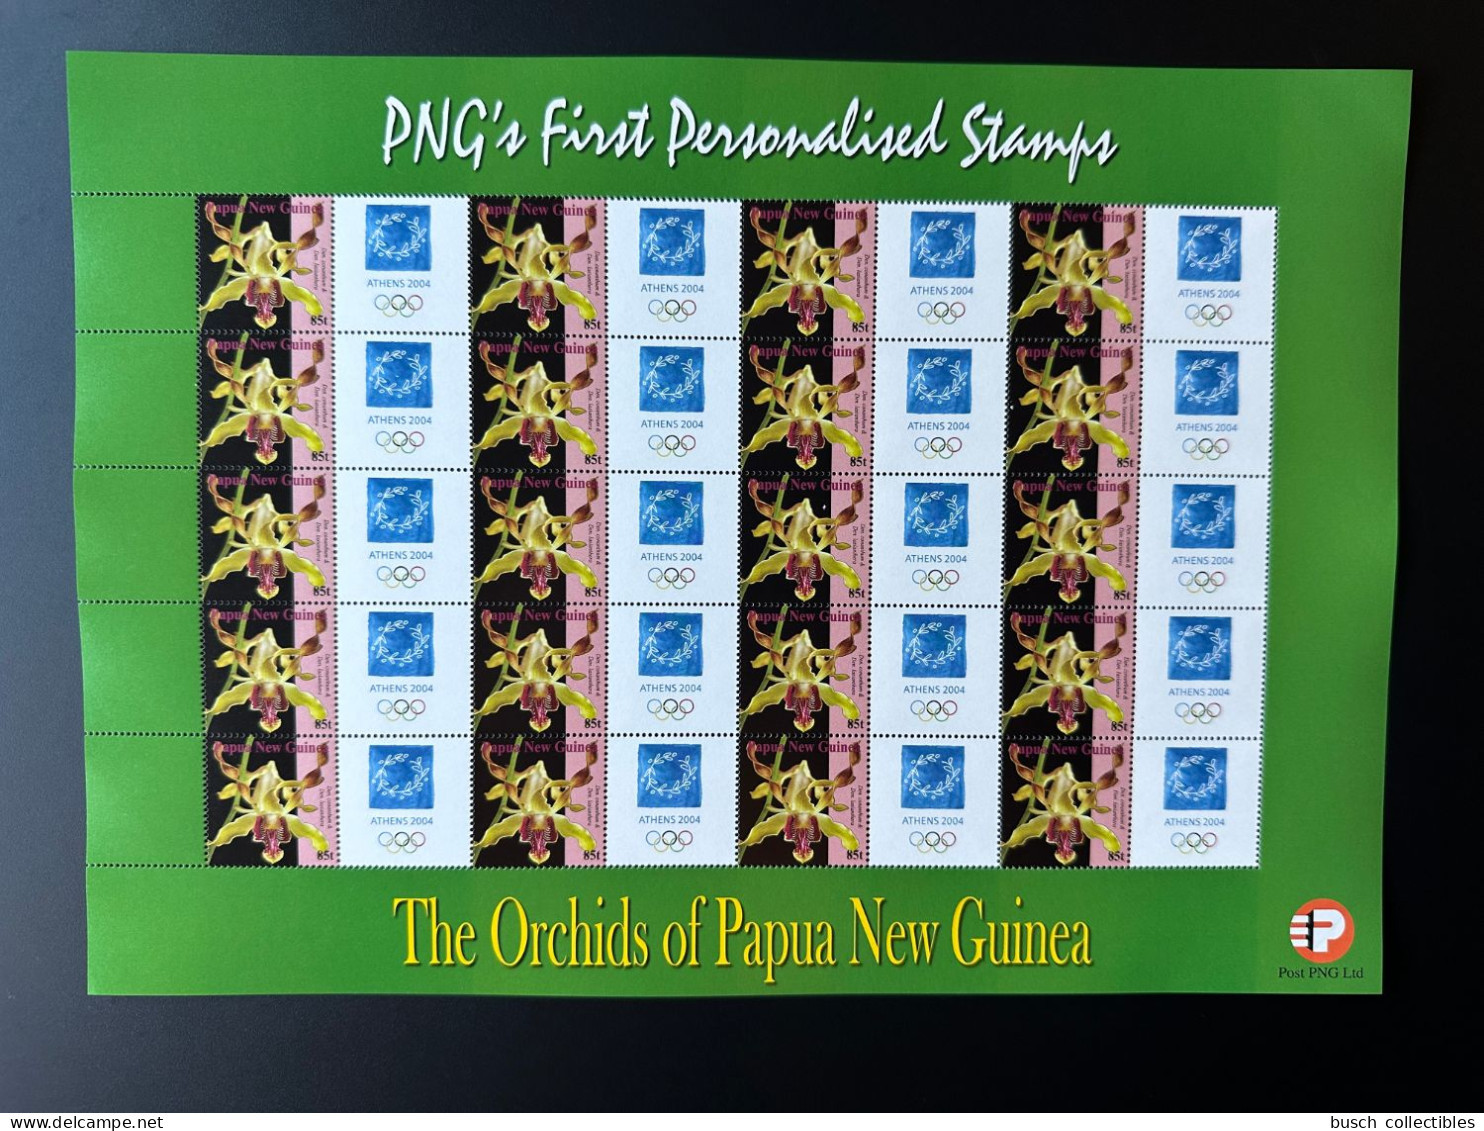 Papua New Guinea PNG 2007 Mi. 1244 Personalized Athens 2004 Olympic Games Jeux Olympiques Olympia Athen Orchids Flowers - Orchidee